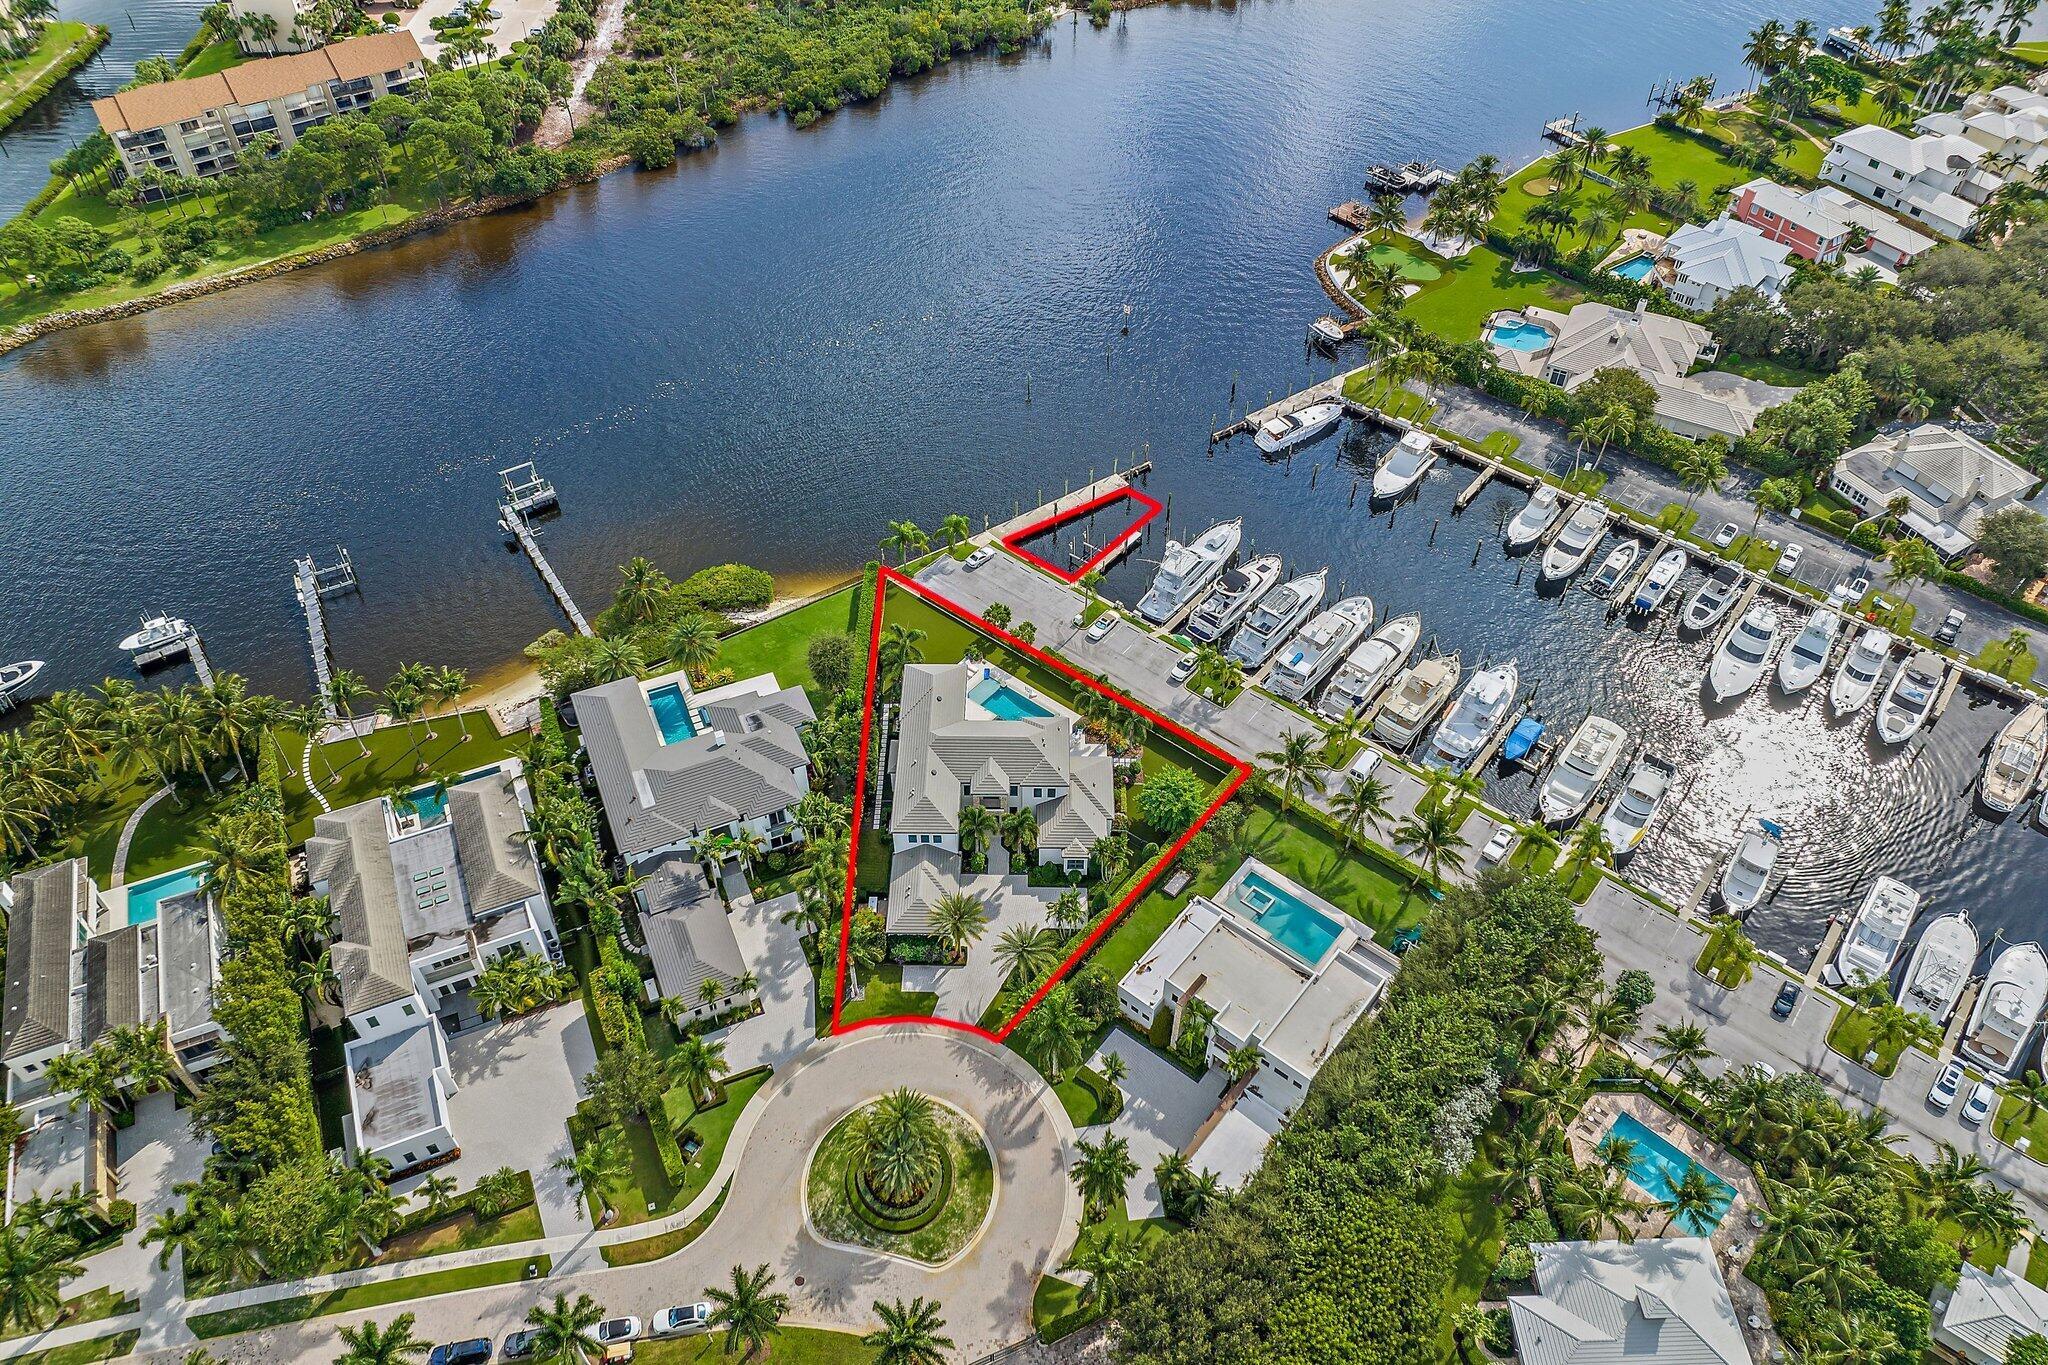 Intracoastal Waterfront Dream HomeDiscover waterfront living at its finest in this stunning custom-built 2016 estate home. Situated on just under half an acre, this 5-bd, 5-full bath, 2-half bath, pool home with a 3-car garage offers a life of elegance and coastal charm. Key Features are a separate 70' boat slip at Cypress Island Marina with a separate property control number  included in the purchase price and accessed by a coded private gate. Entertainer's Delight: The heart of the home is a double island kitchen great room, perfect for hosting gatherings. Solid Concrete Construction: Built to last, providing peace of mind. Generator: Ensures uninterrupted power supply. Close to restaurants, shopping, airports and medical services.Less than 0.5 miles to Atlantic beaches.